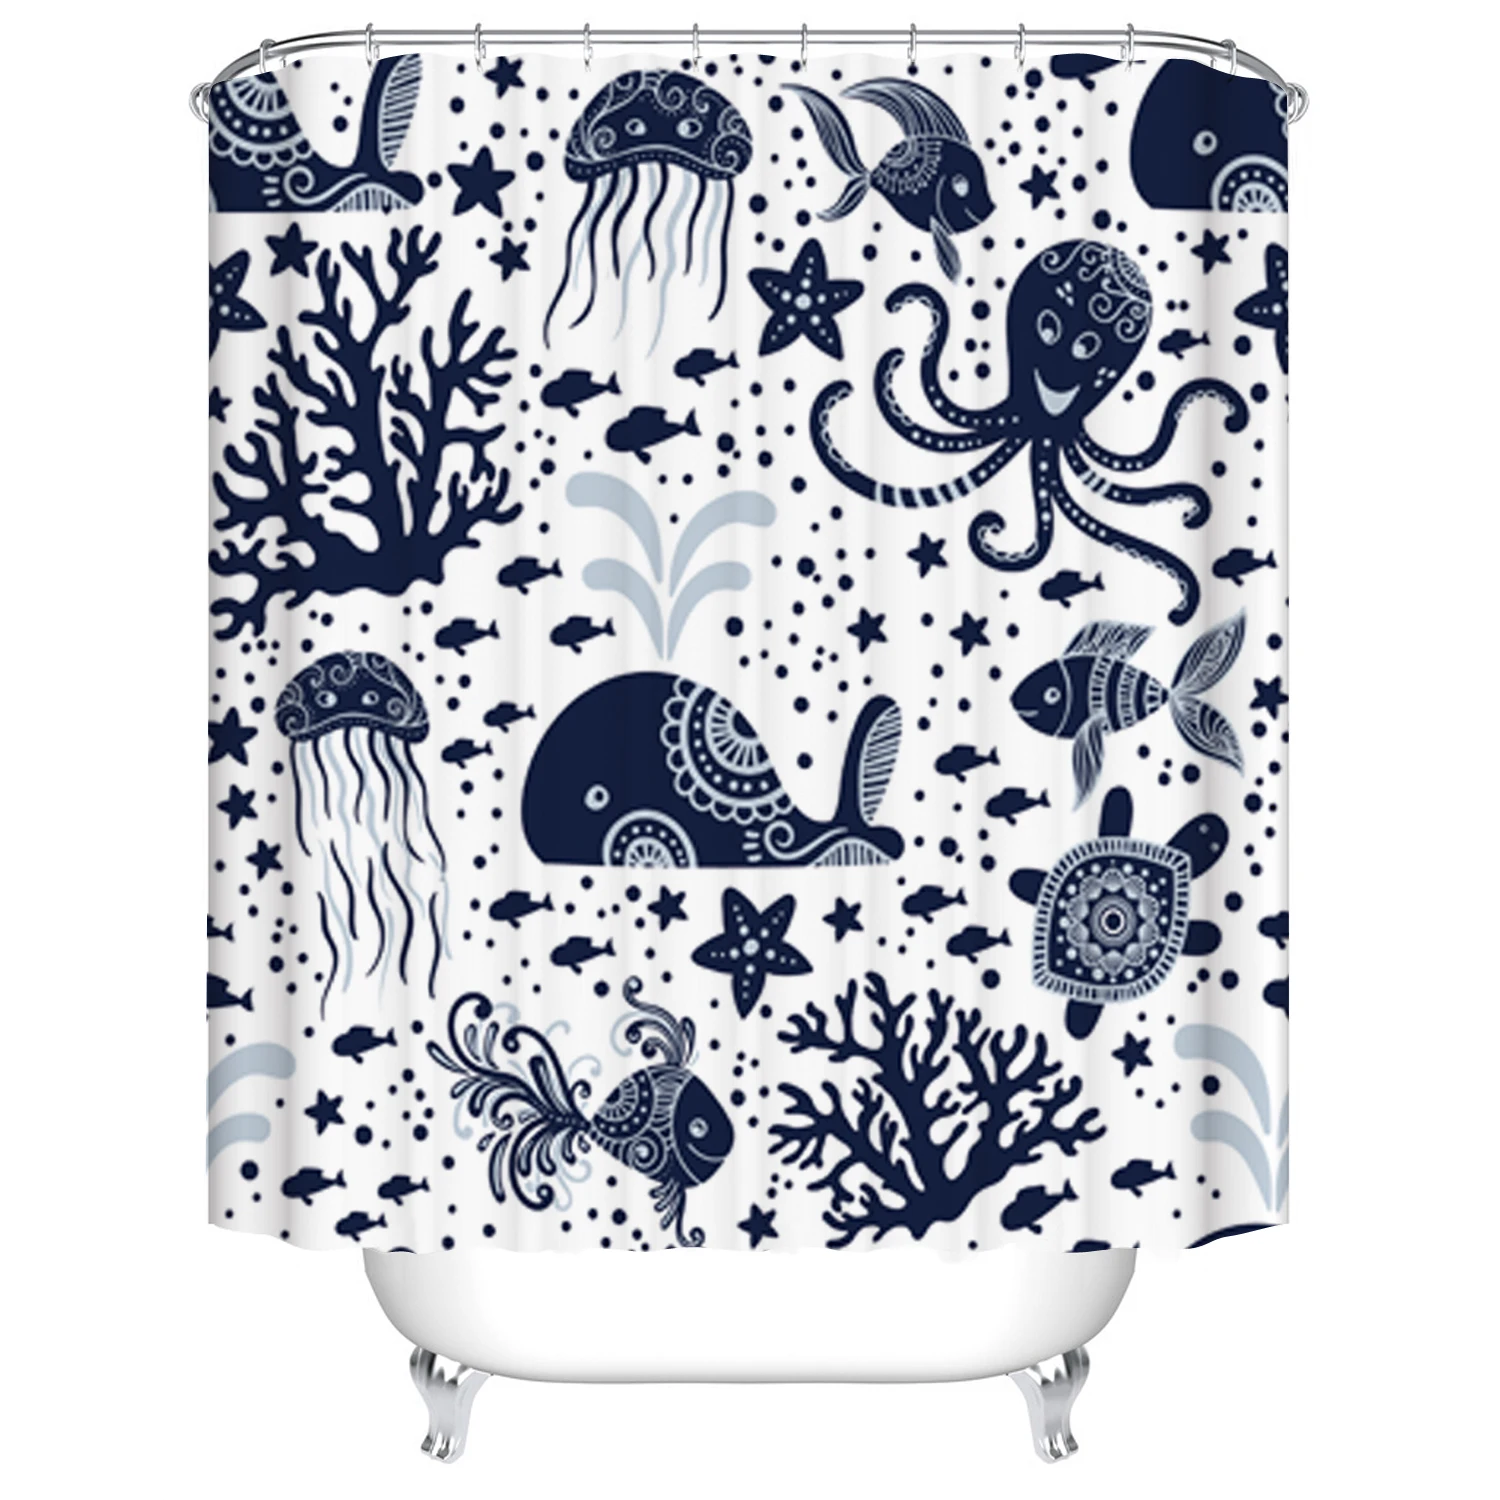 

Abstract Fish Shower Curtain Tropical Marine Life Whale Turtle Octopus Ocean Theme Underwater Animal School